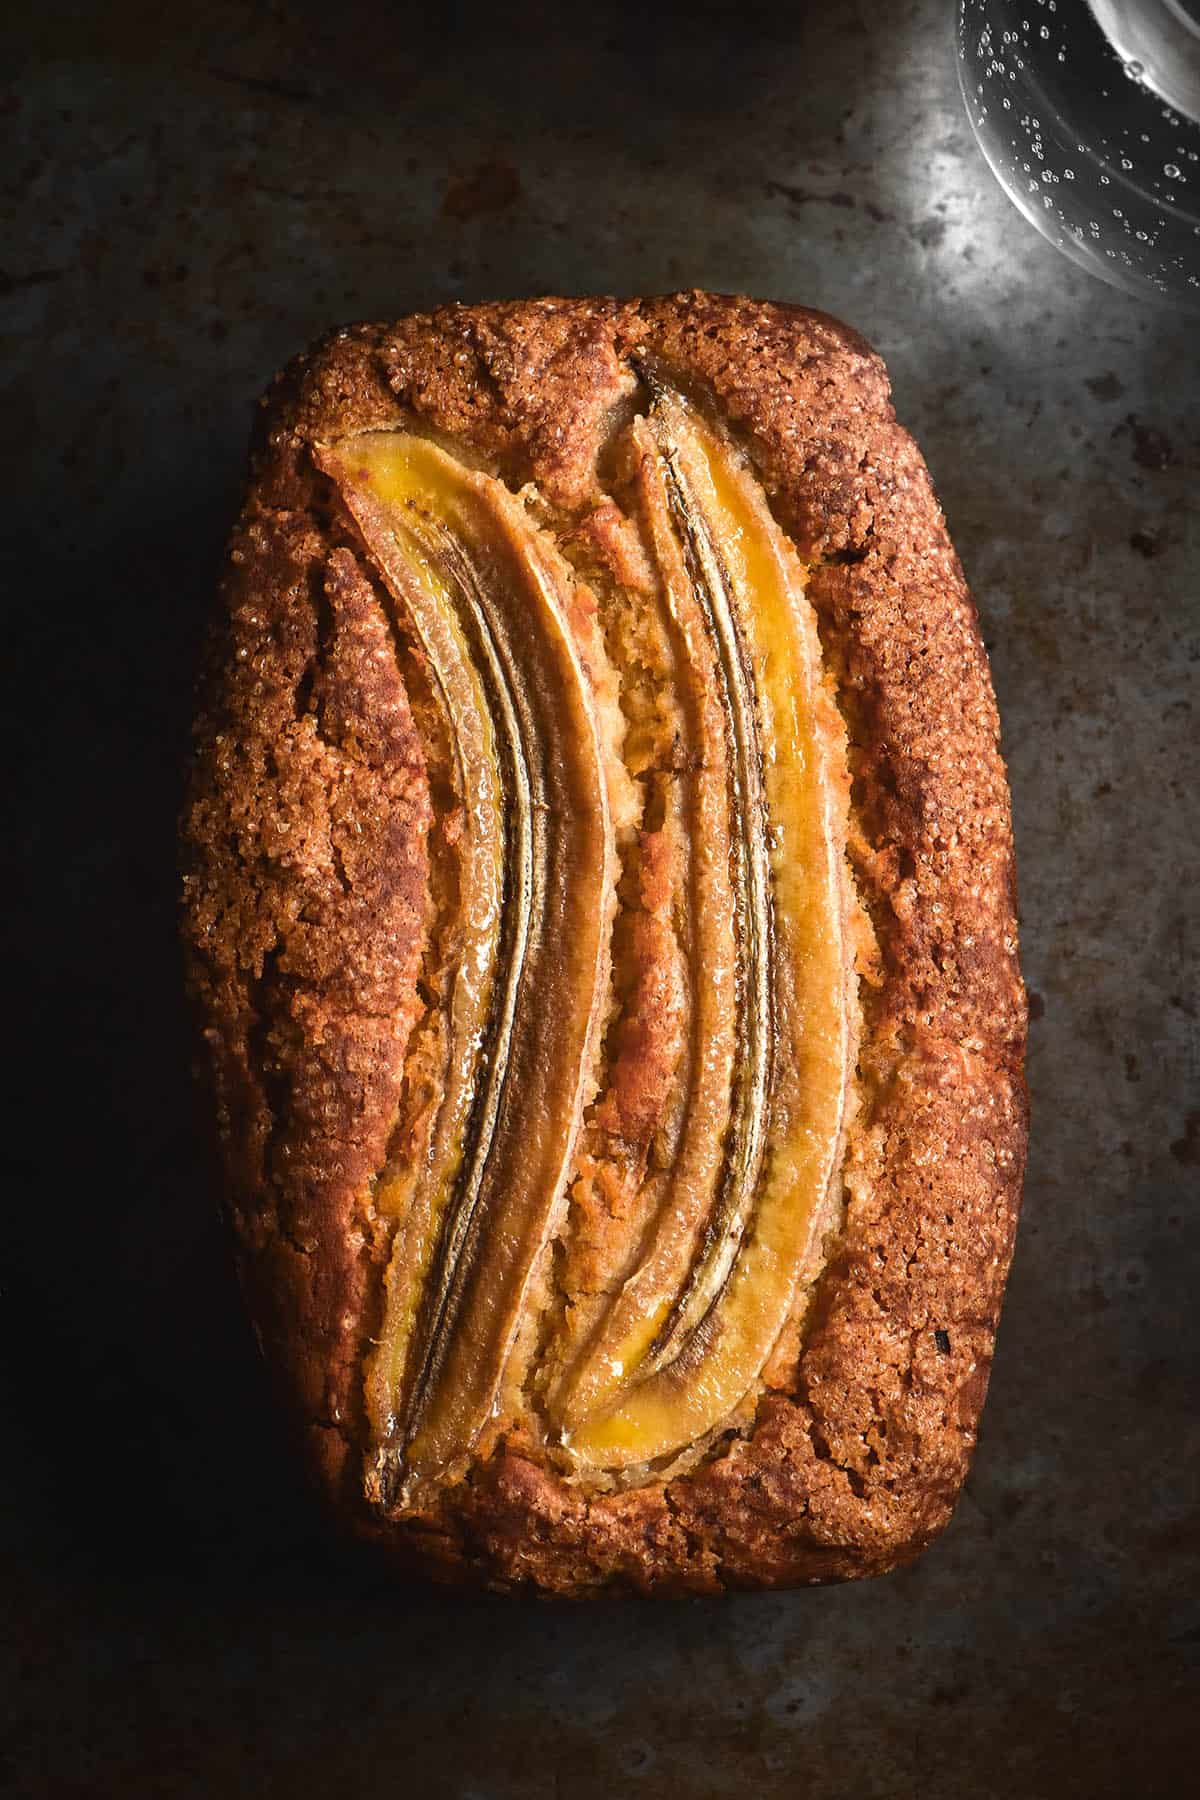 An aerial close up image of a loaf of gluten free dairy free banana bread. The banana bread sits on a dark steel backdrop. The banana loaf is golden brown and topped with slices of banana and finishing sugar